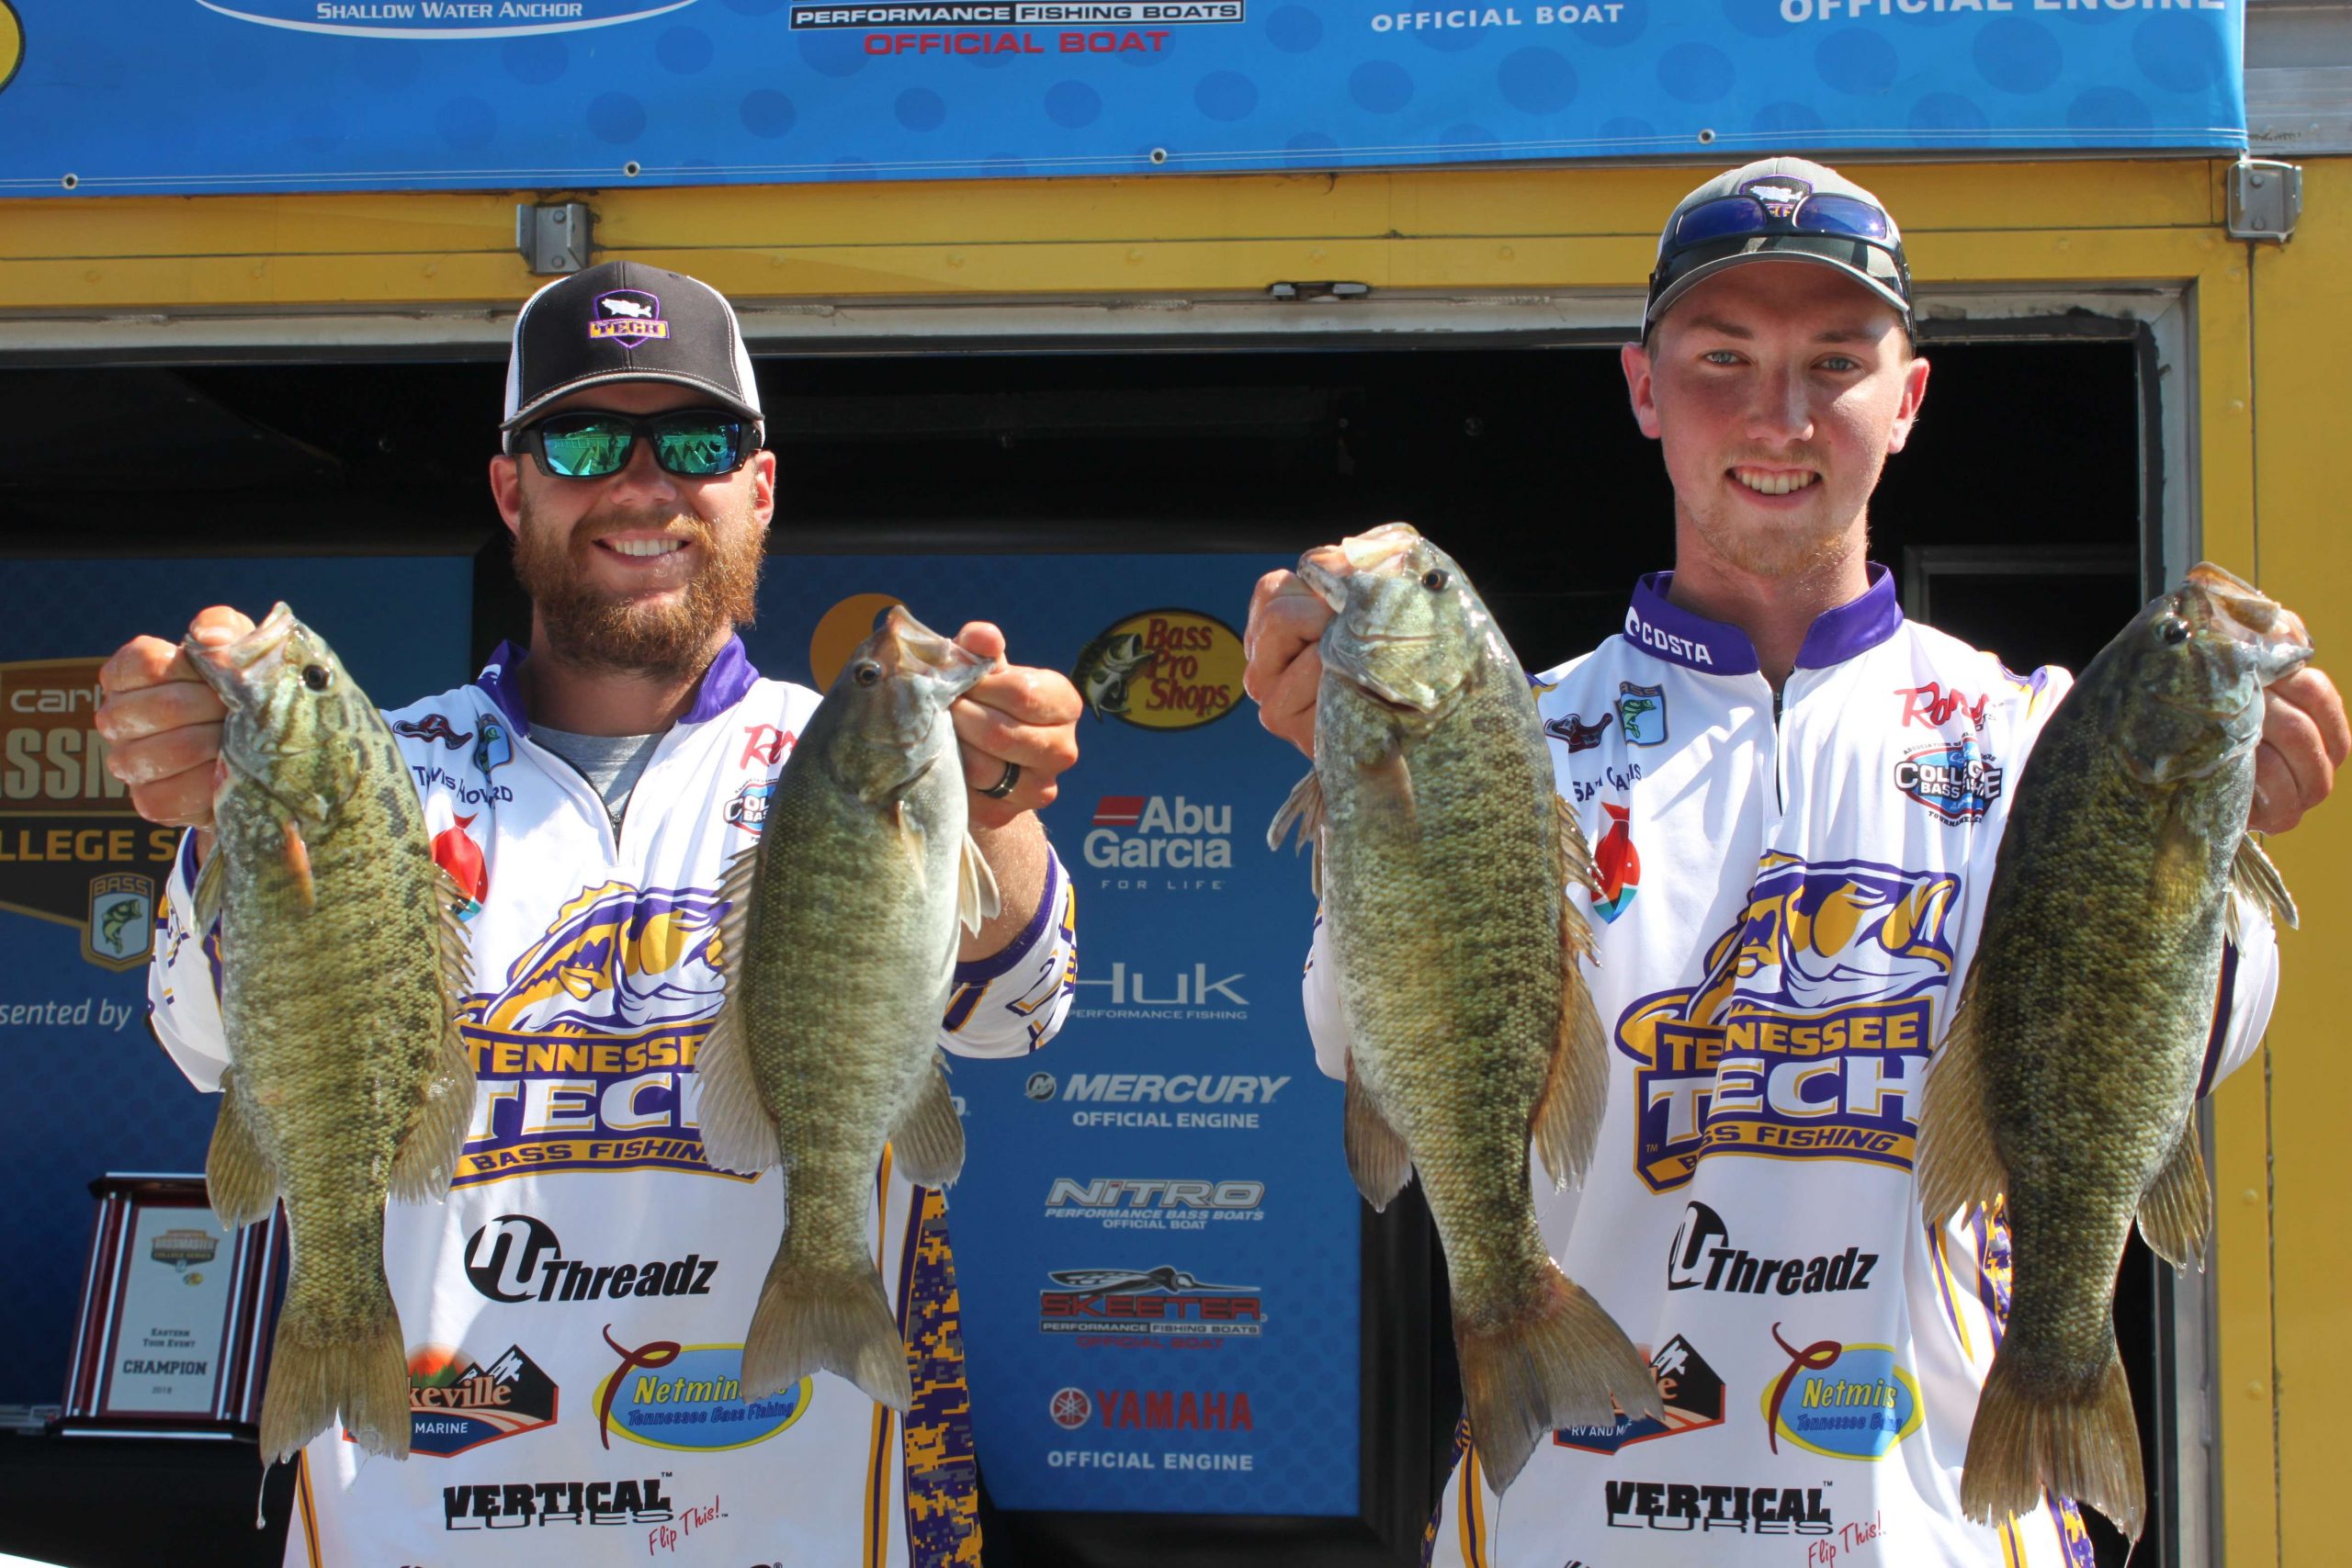 Travis Howard and Sam Carris of Tennessee Tech finished 20th with 35-5.